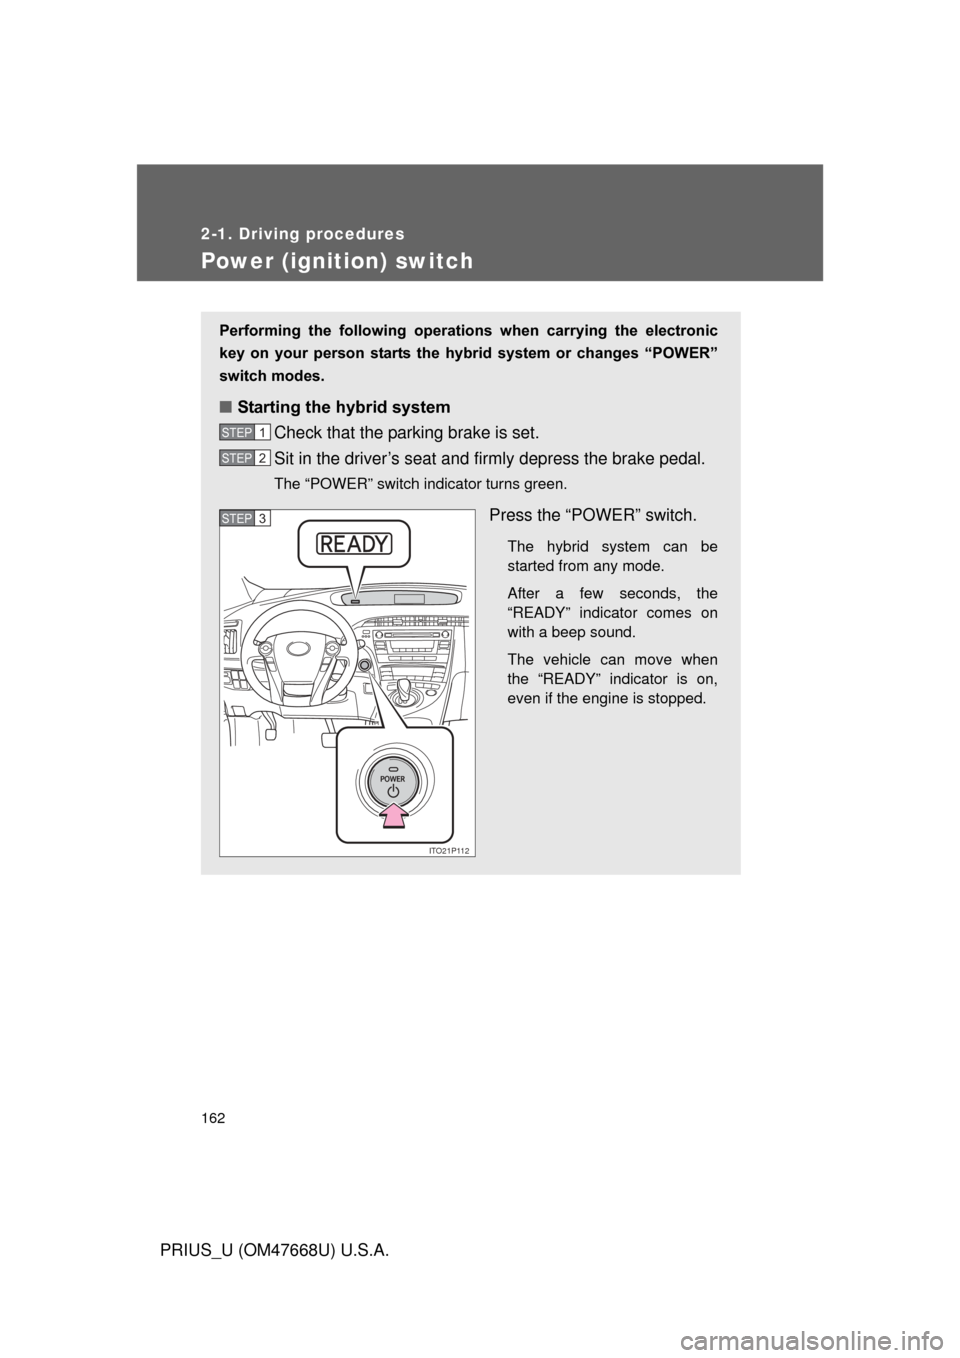 TOYOTA PRIUS 2010 3.G Owners Manual 162
2-1. Driving procedures
PRIUS_U (OM47668U) U.S.A.
Power (ignition) switch
Performing  the  following  operations  when  carrying  the  electronic 
key  on  your  person  starts  the  hybr id  syst